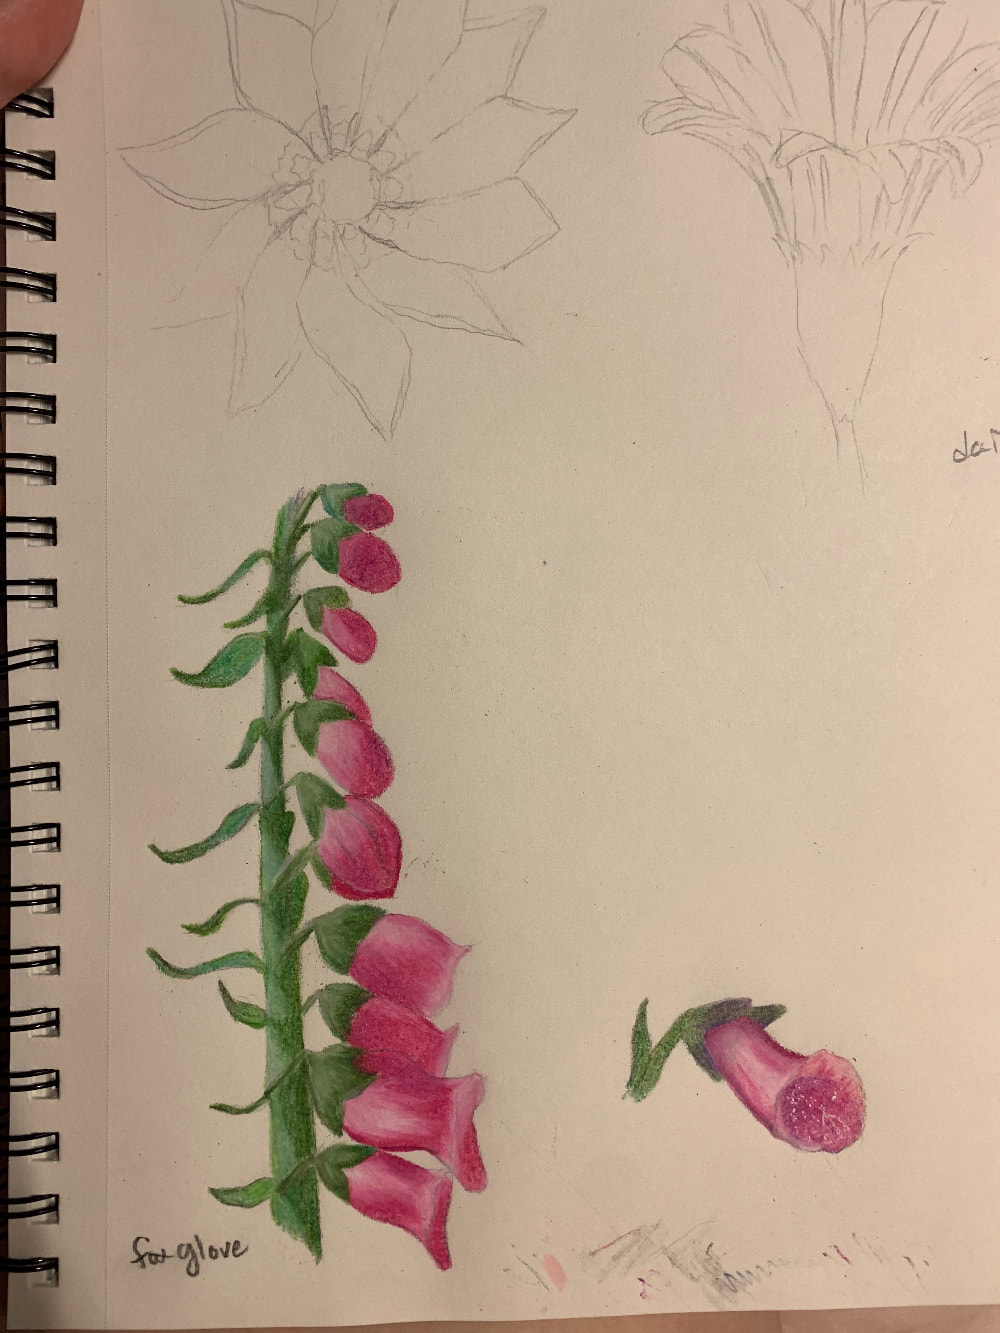 Sketchbook page featuring flowers. The top two flowers are daisies. At the bottom is a colorful drawing of a stem of foxgloves and a single foxglove bloom. The stem is shades of green with shadows from a light source to the left. The blooms are shades of magenta with white speckles inside. They were done in color pencil. 